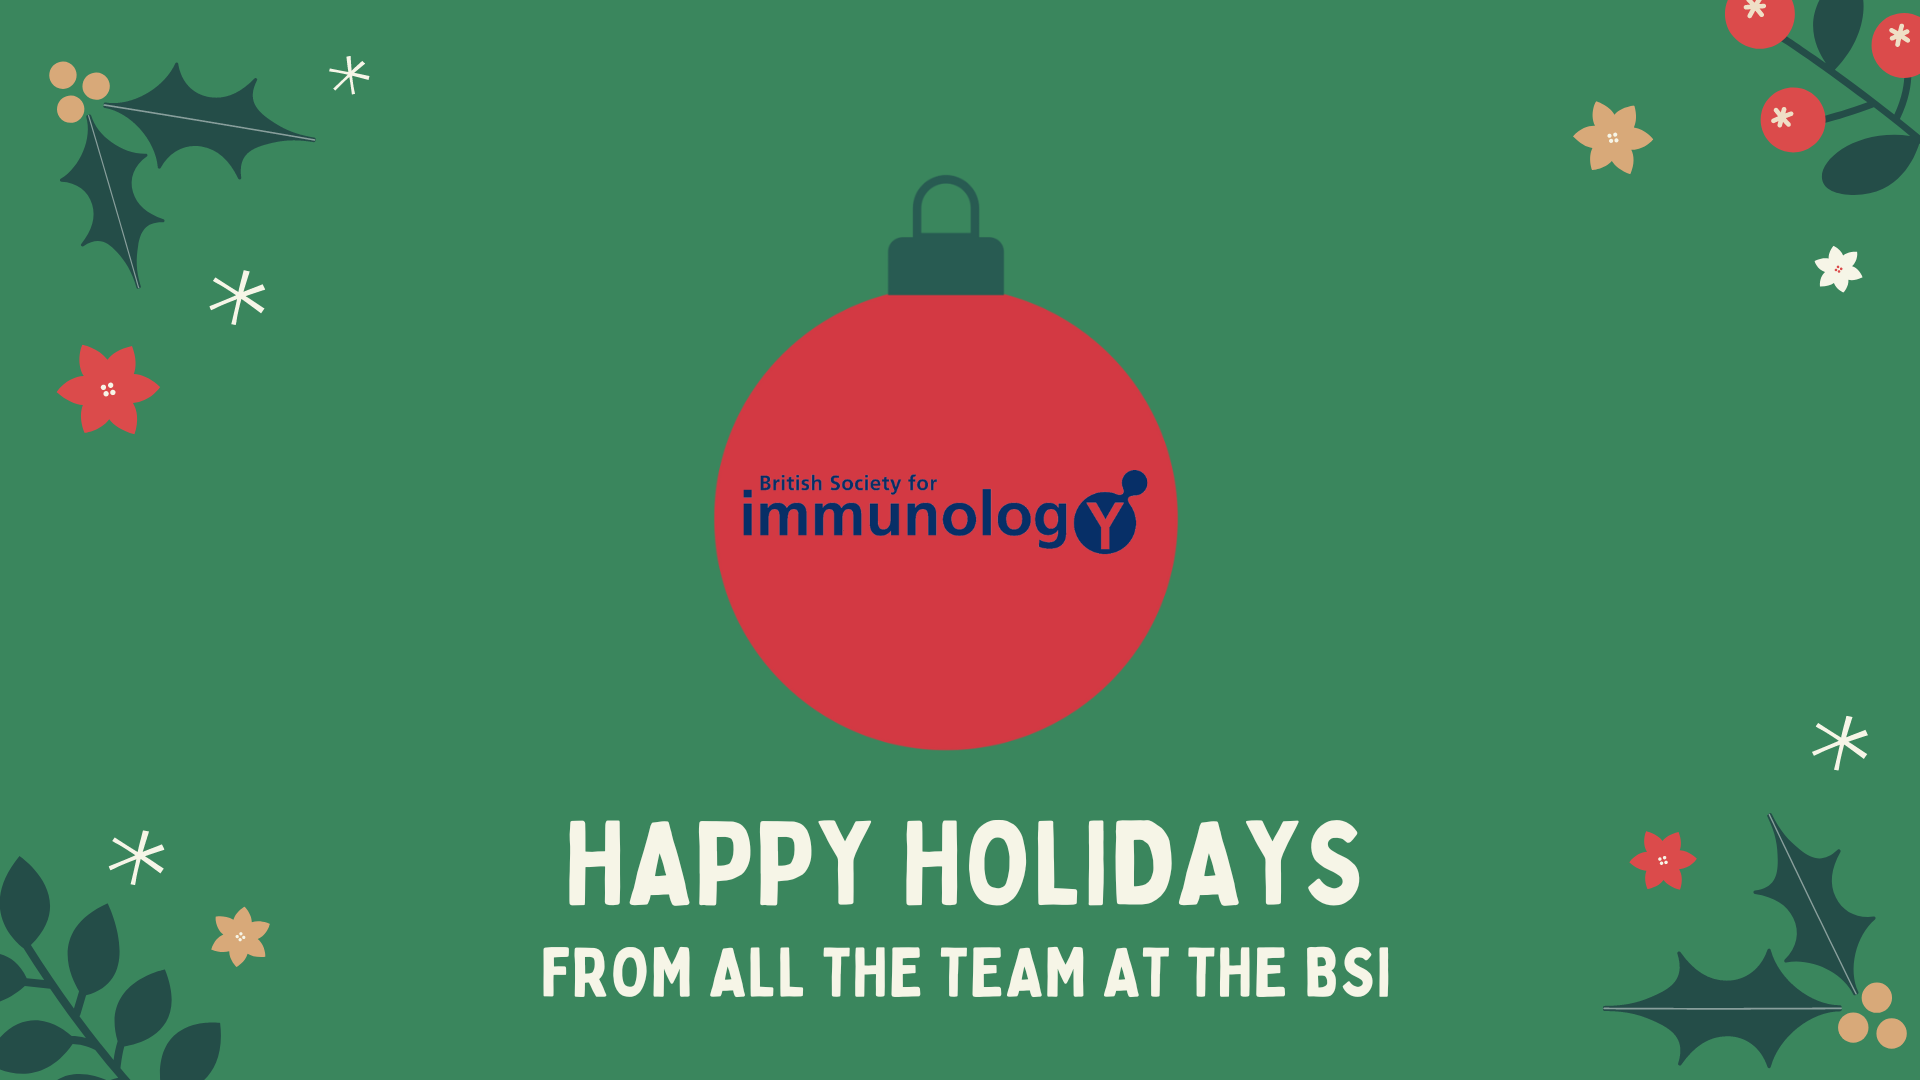 Happy Holidays from the BSI